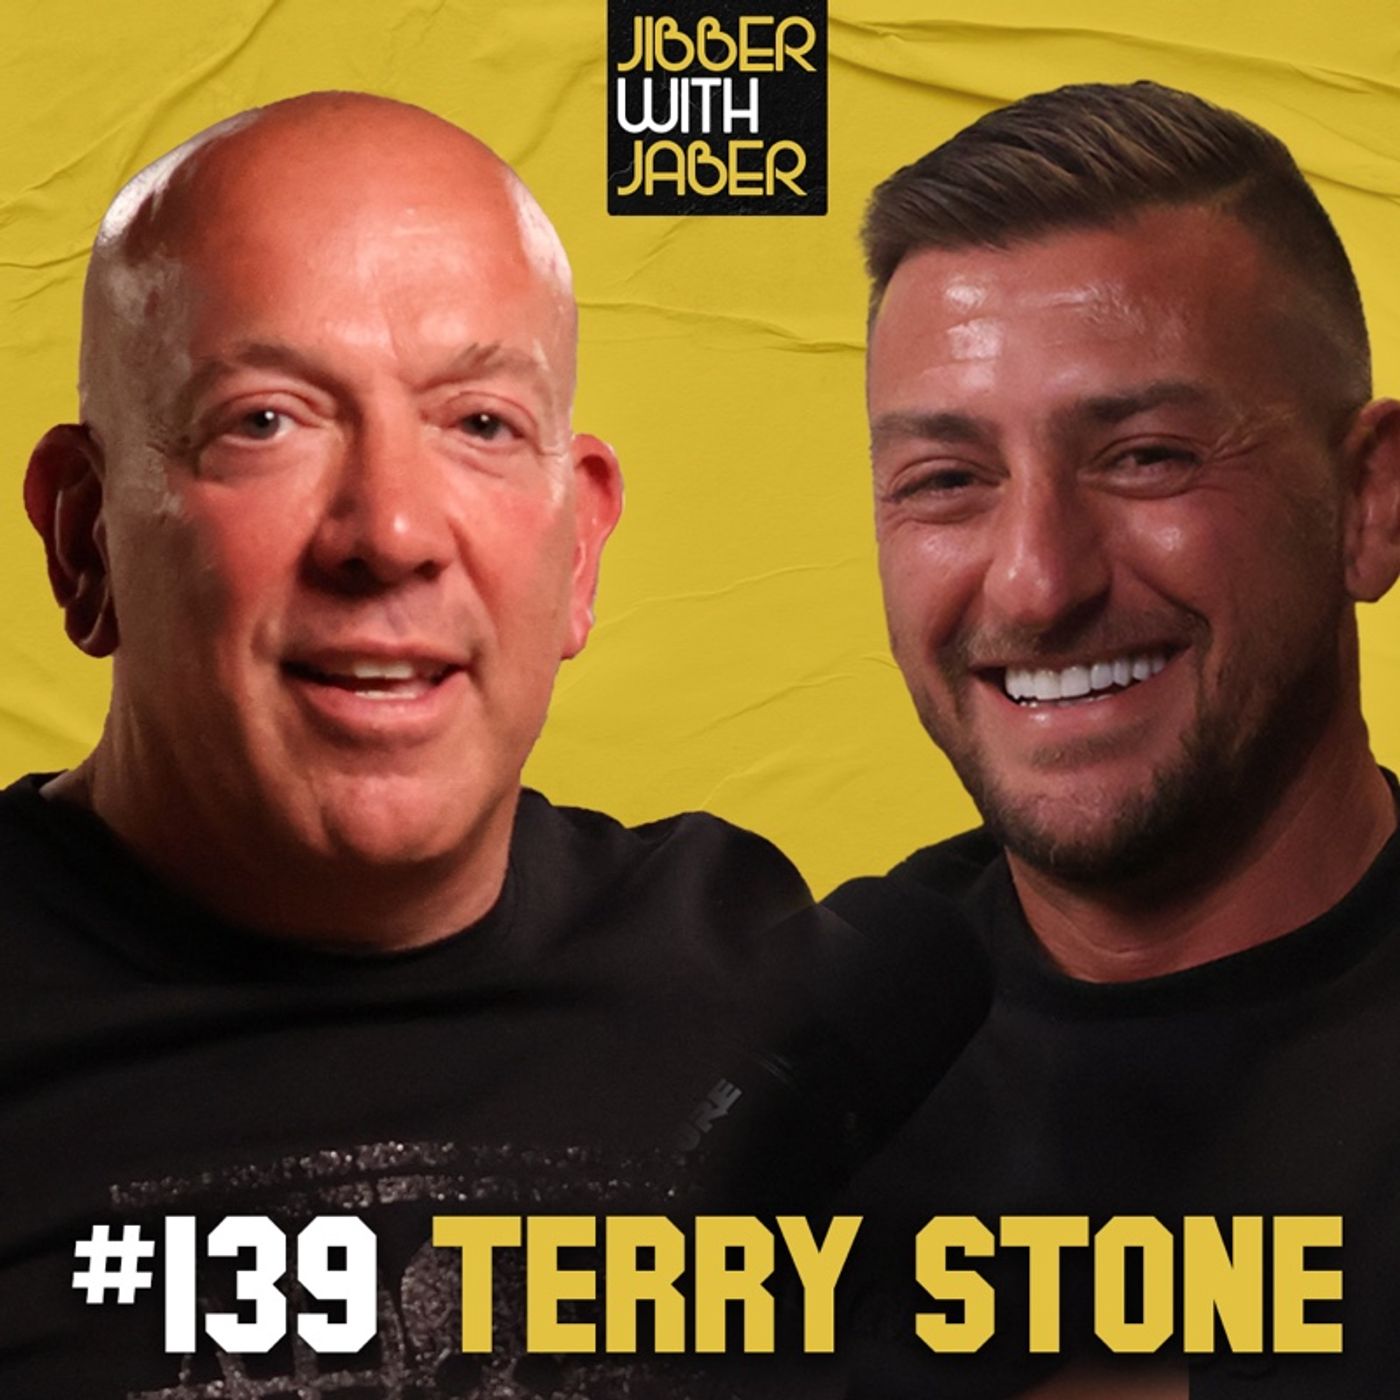 Terry Stone | The criminal connection | EP139 Jibber with Jaber